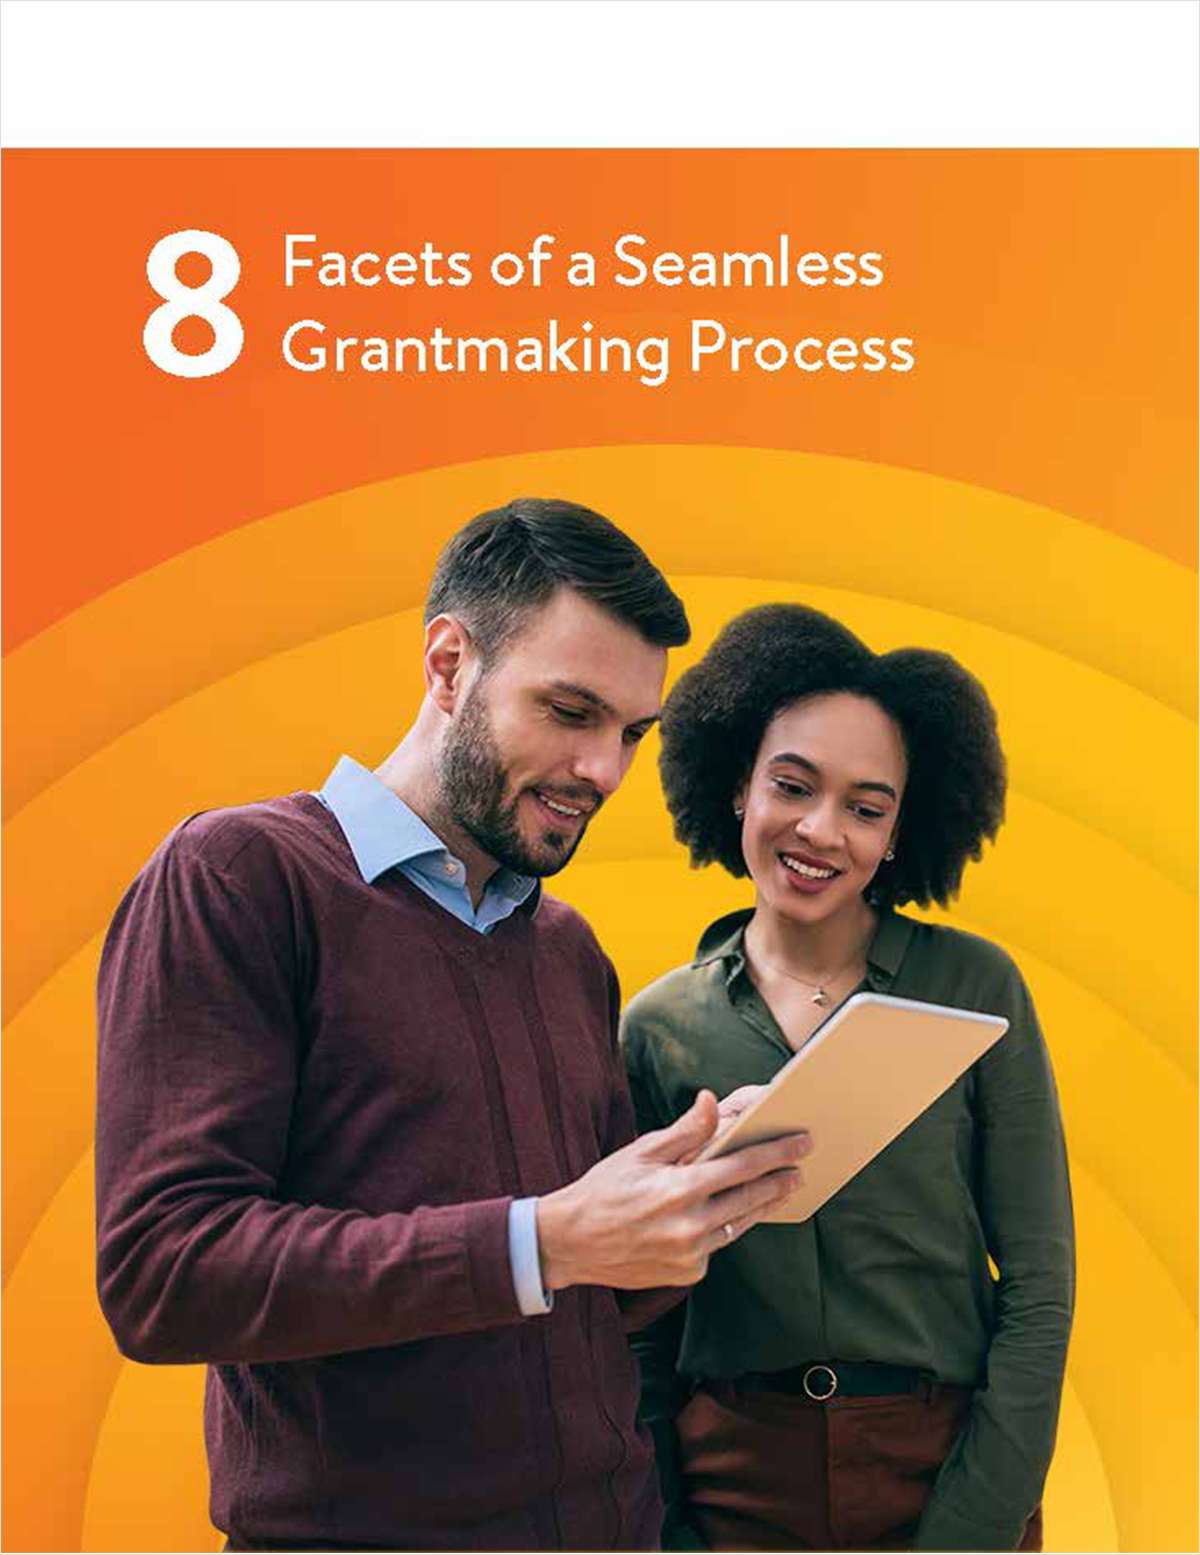 8 Facets of a Seamless Grantmaking Process